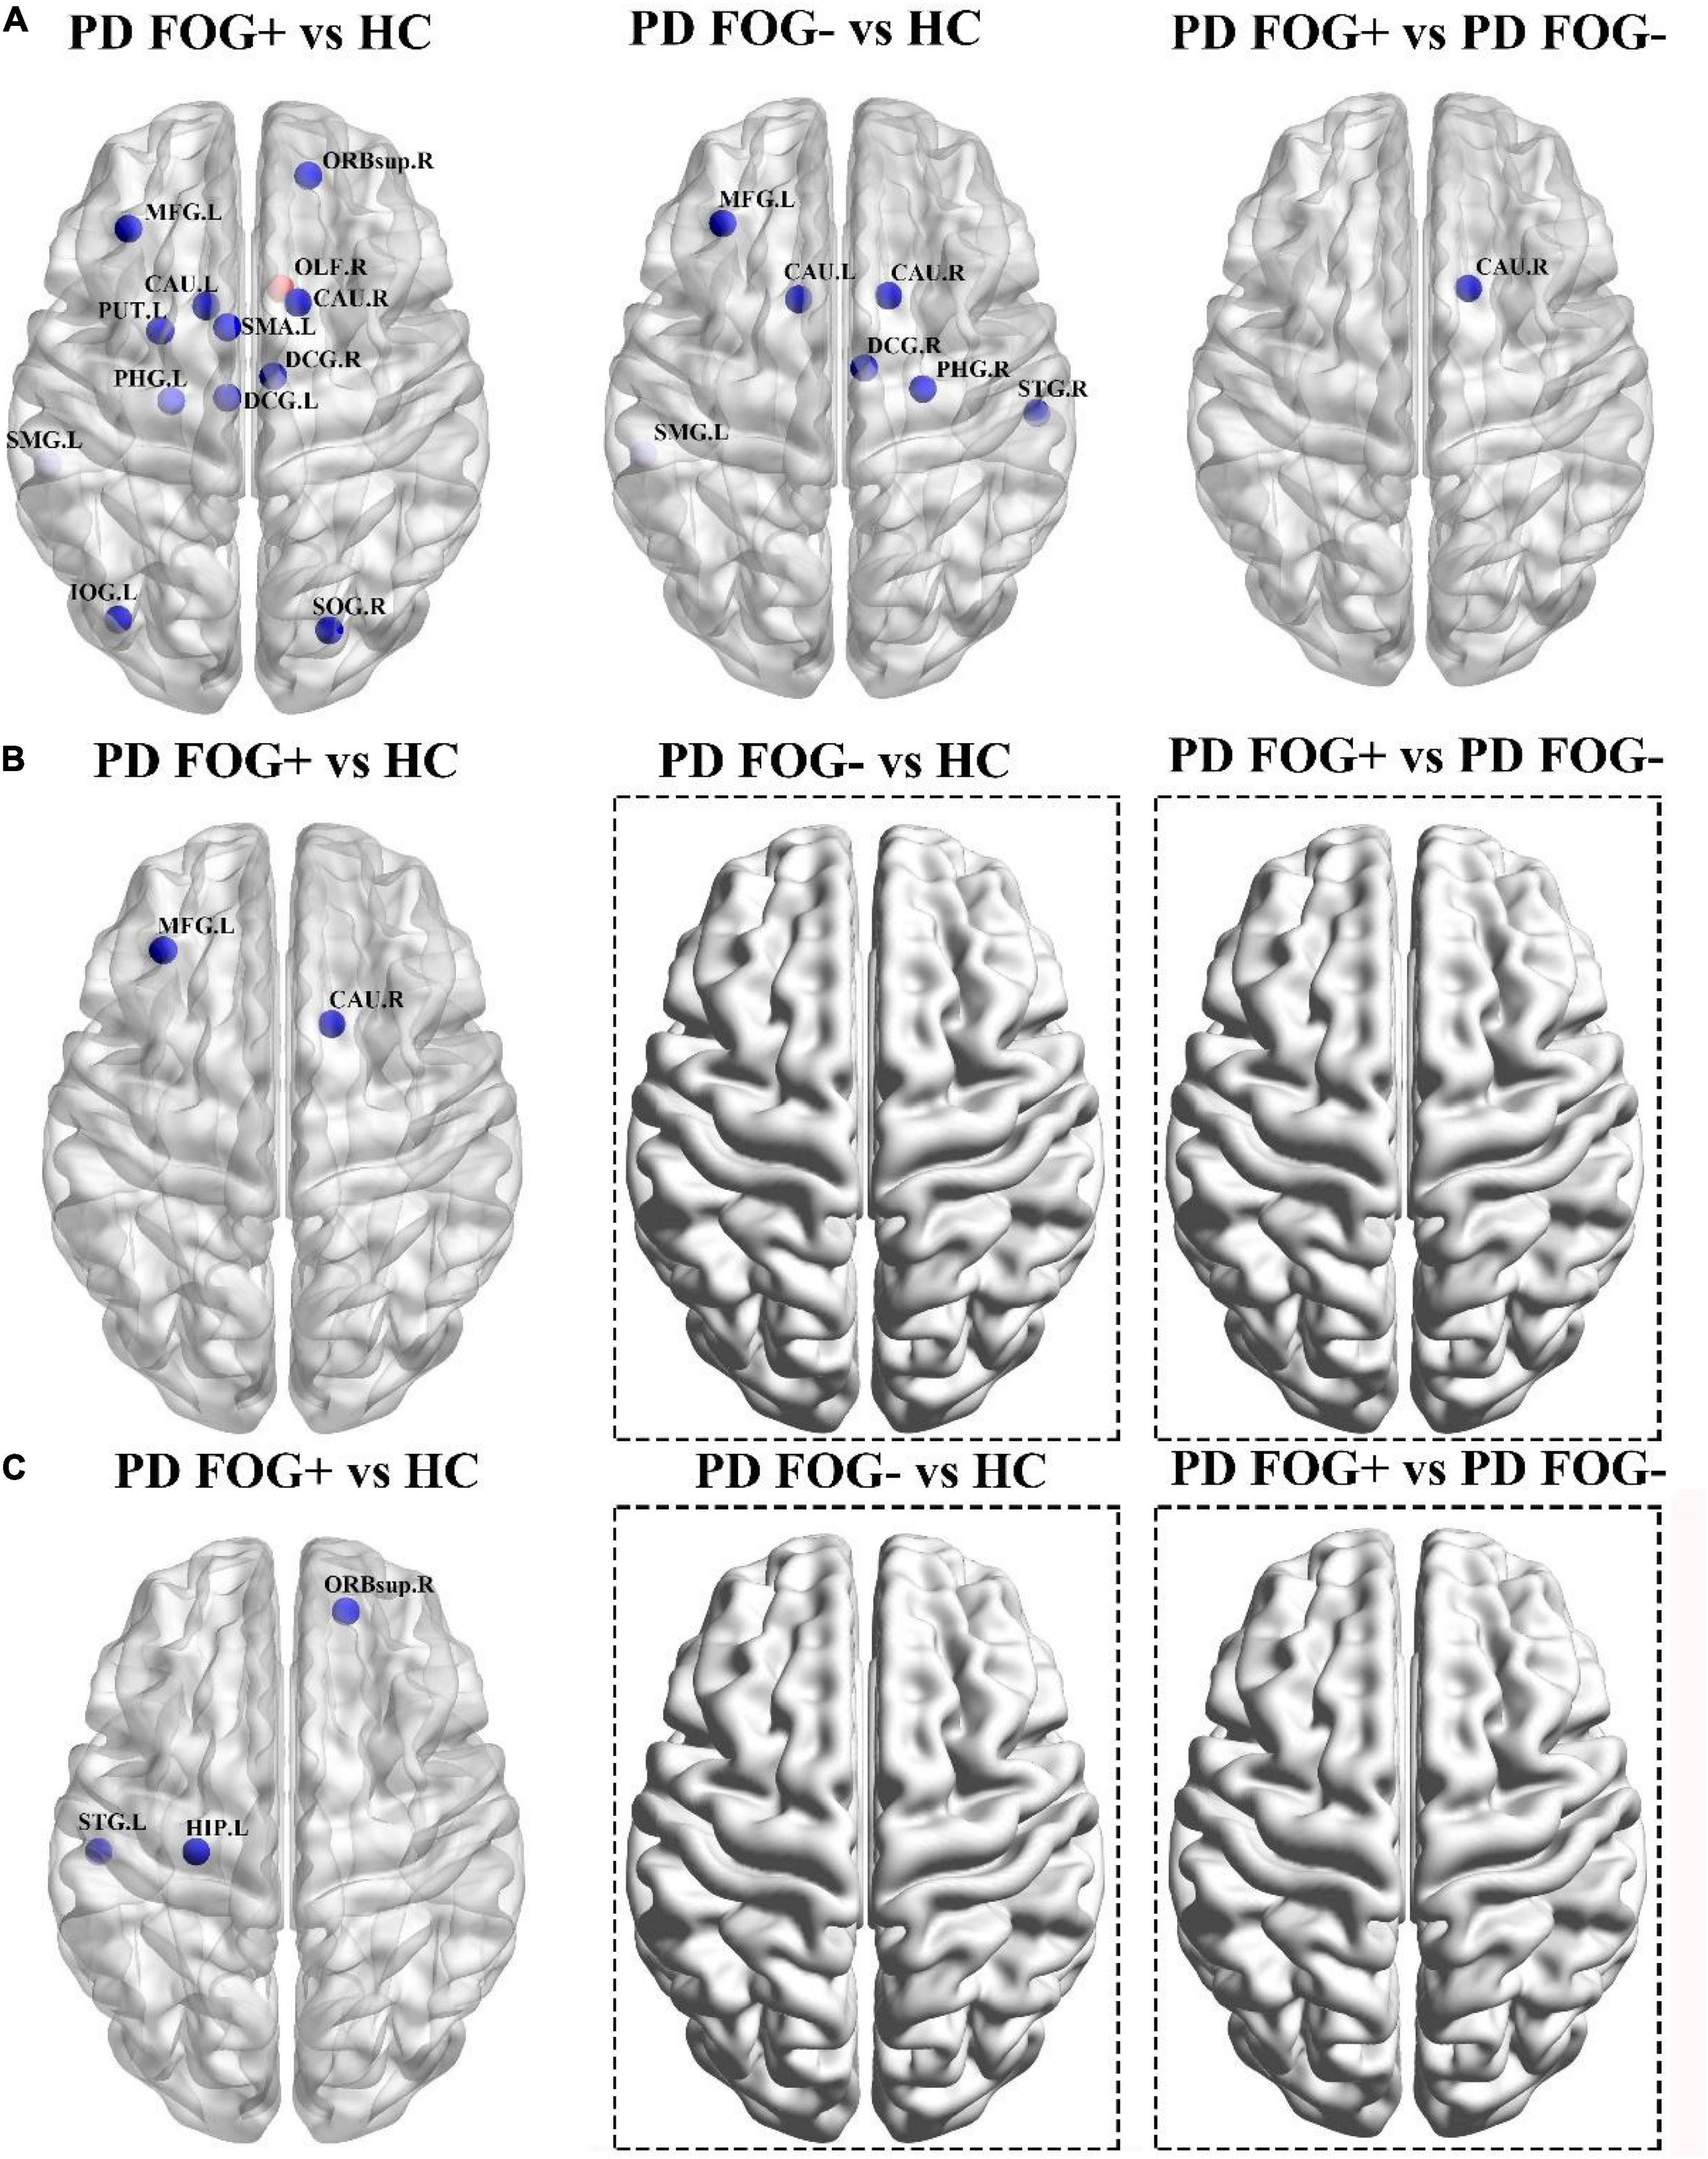 Frontiers  Structural Brain Network Abnormalities in Parkinson's